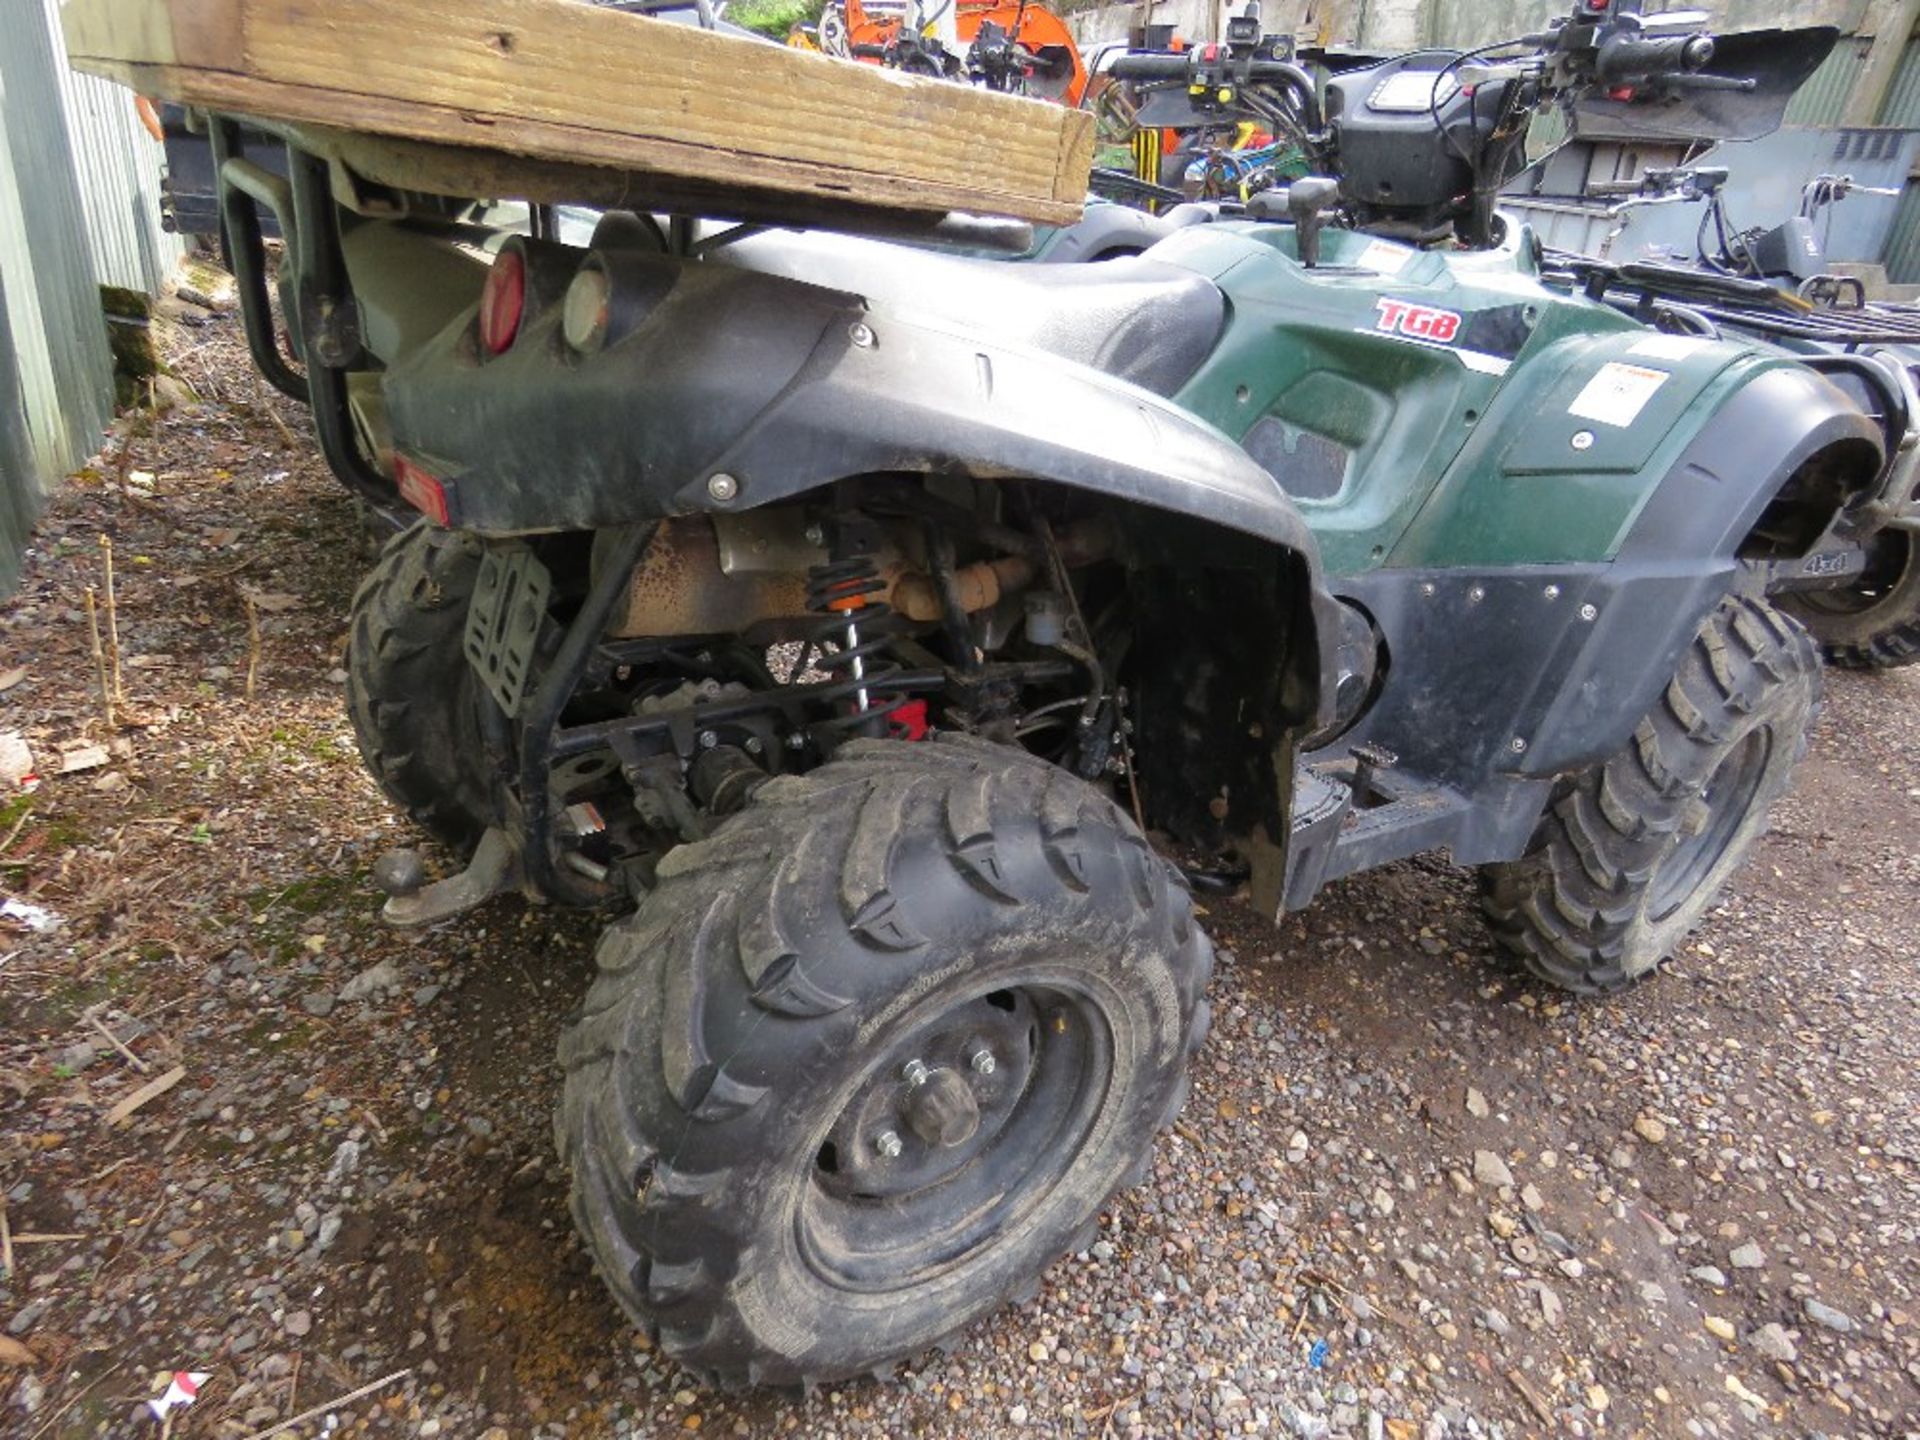 TGB 550 4WD QUAD BIKE, 2547 REC MILES, SUPPLIED NEW IN MAY 2018. WHEN TESTED WAS SEEN TO DRIVE, STE - Image 2 of 5